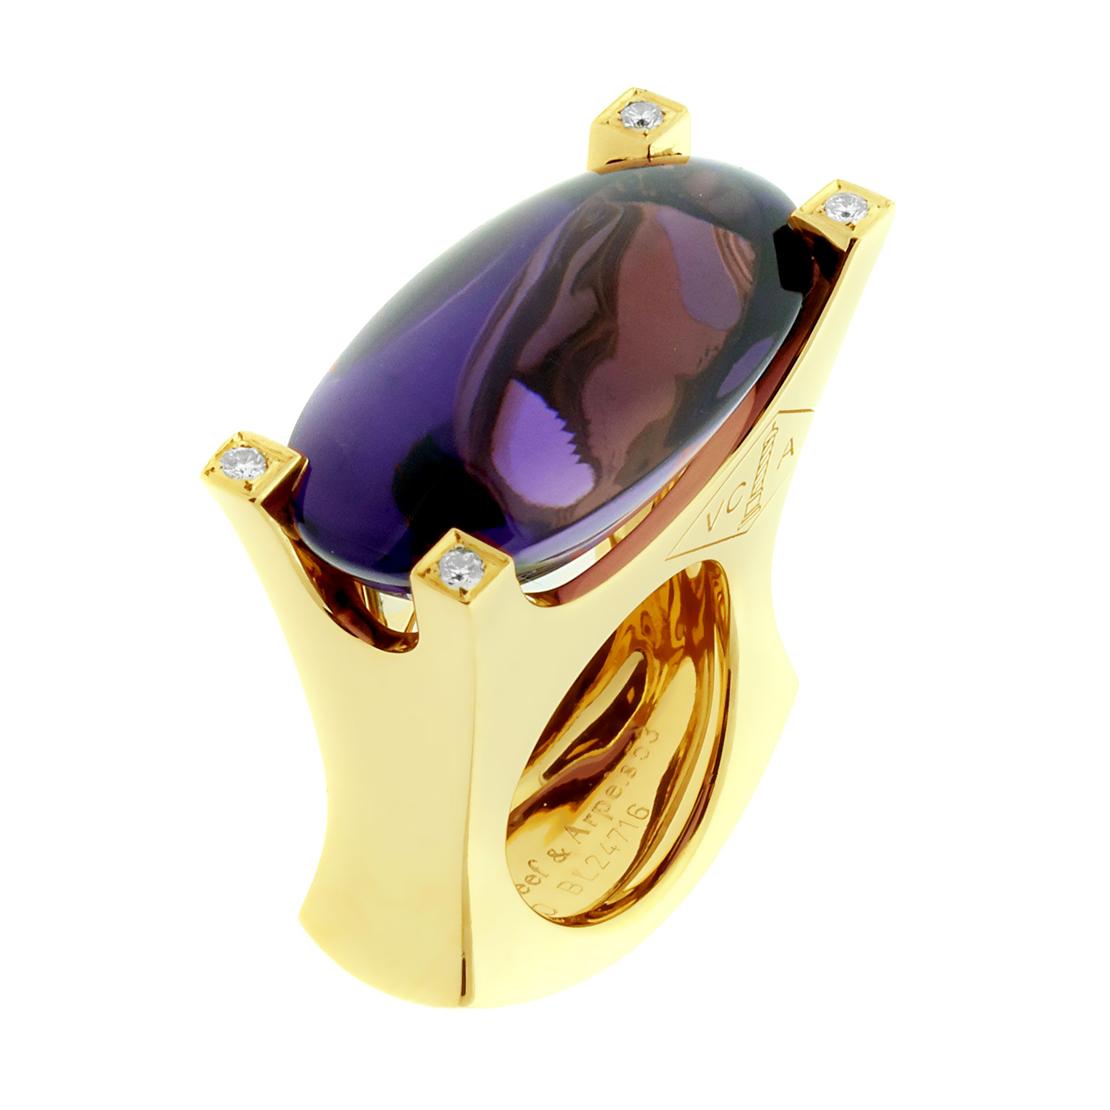 Van Cleef & Arpels Gold Diamond and Amethyst Ring In Excellent Condition For Sale In Feasterville, PA